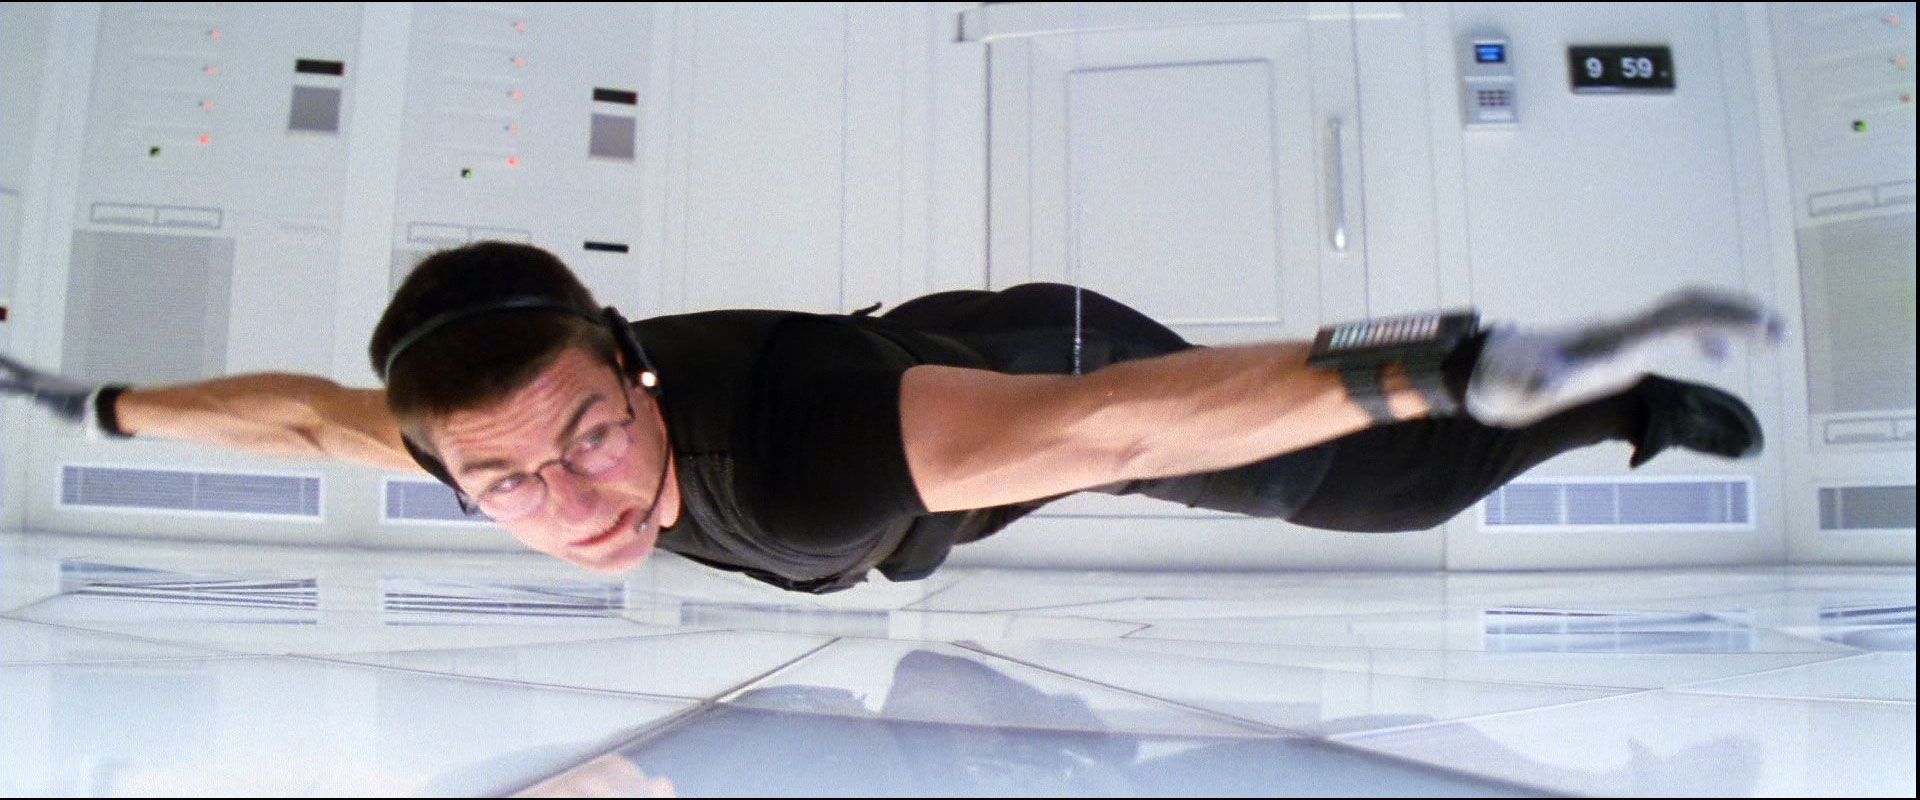 Mission: Impossible HD wallpapers, Desktop wallpaper - most viewed